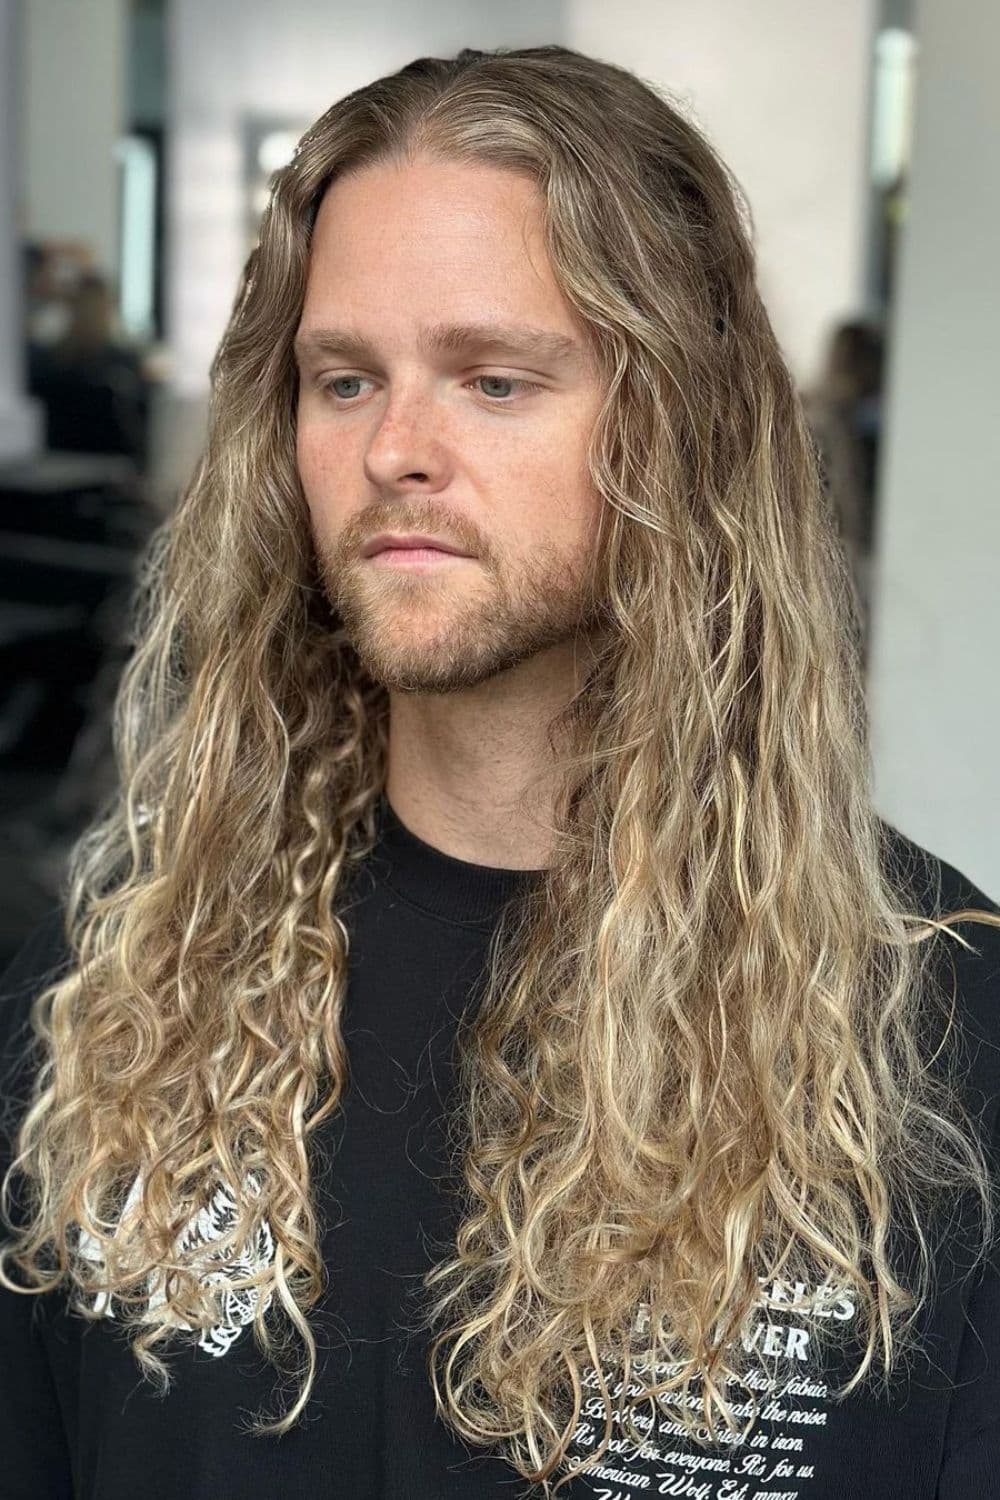 A man with a long blonde curly hair.